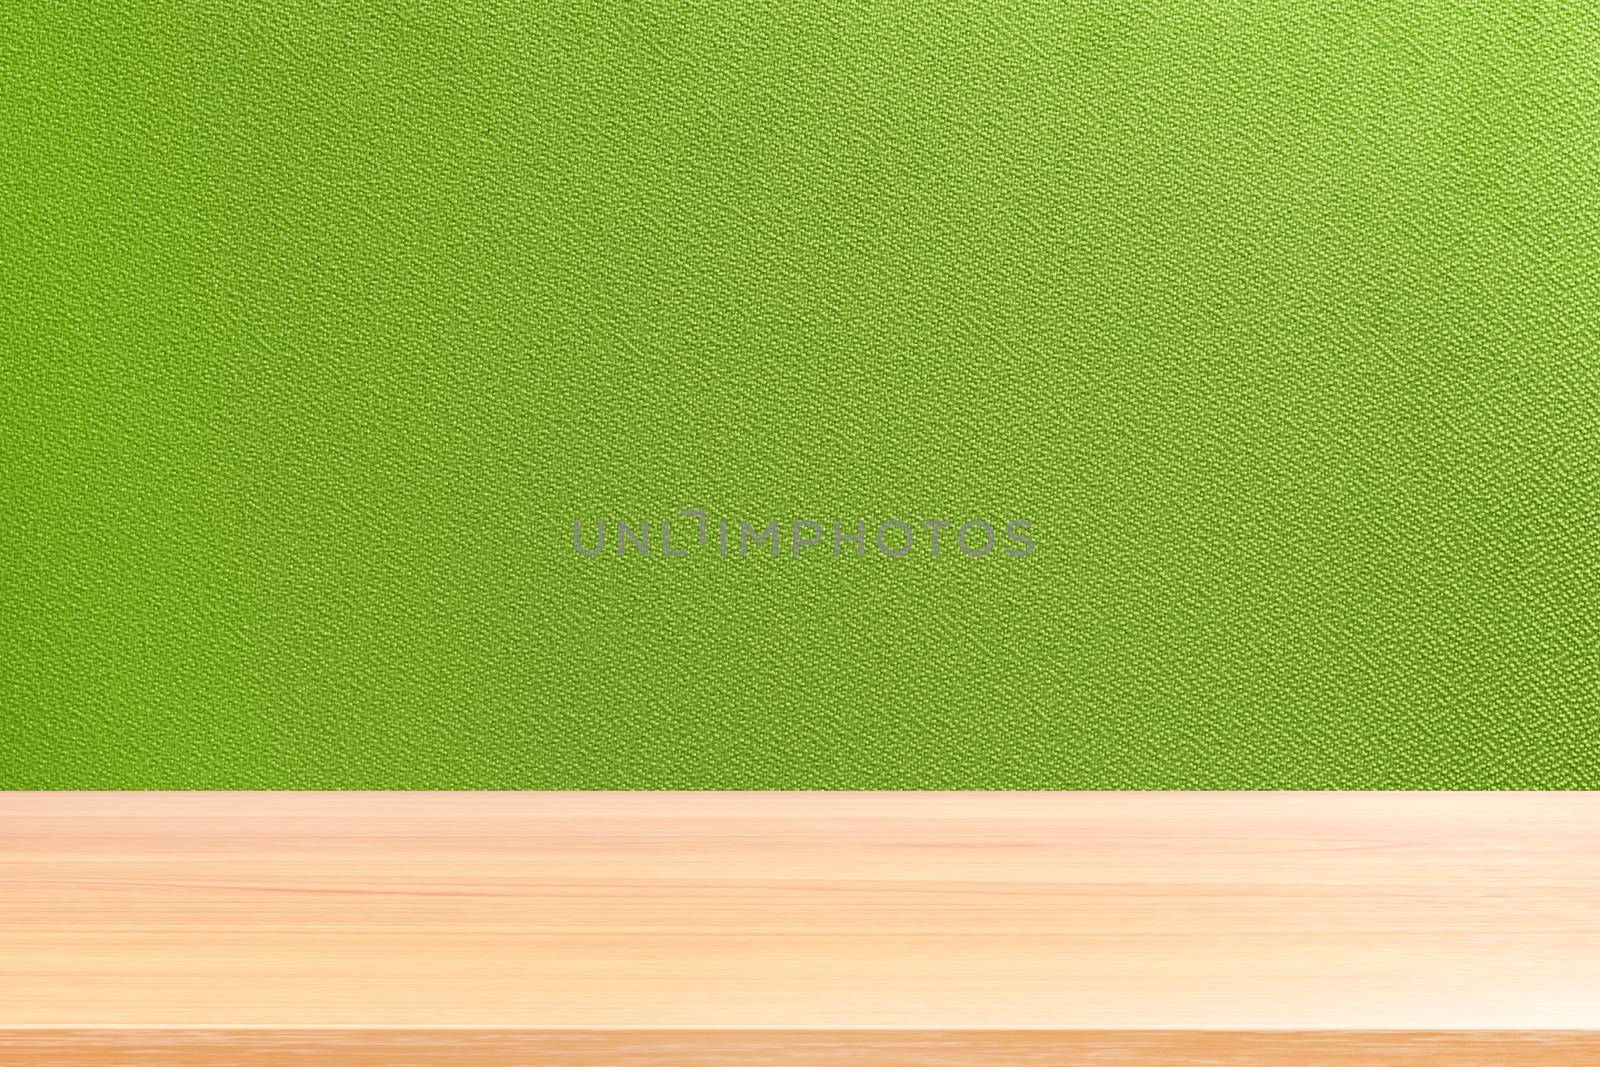 wood plank on green partition wall background, empty wood table floors on partition wall texture background, wood table board empty on partition wall for mock up display products